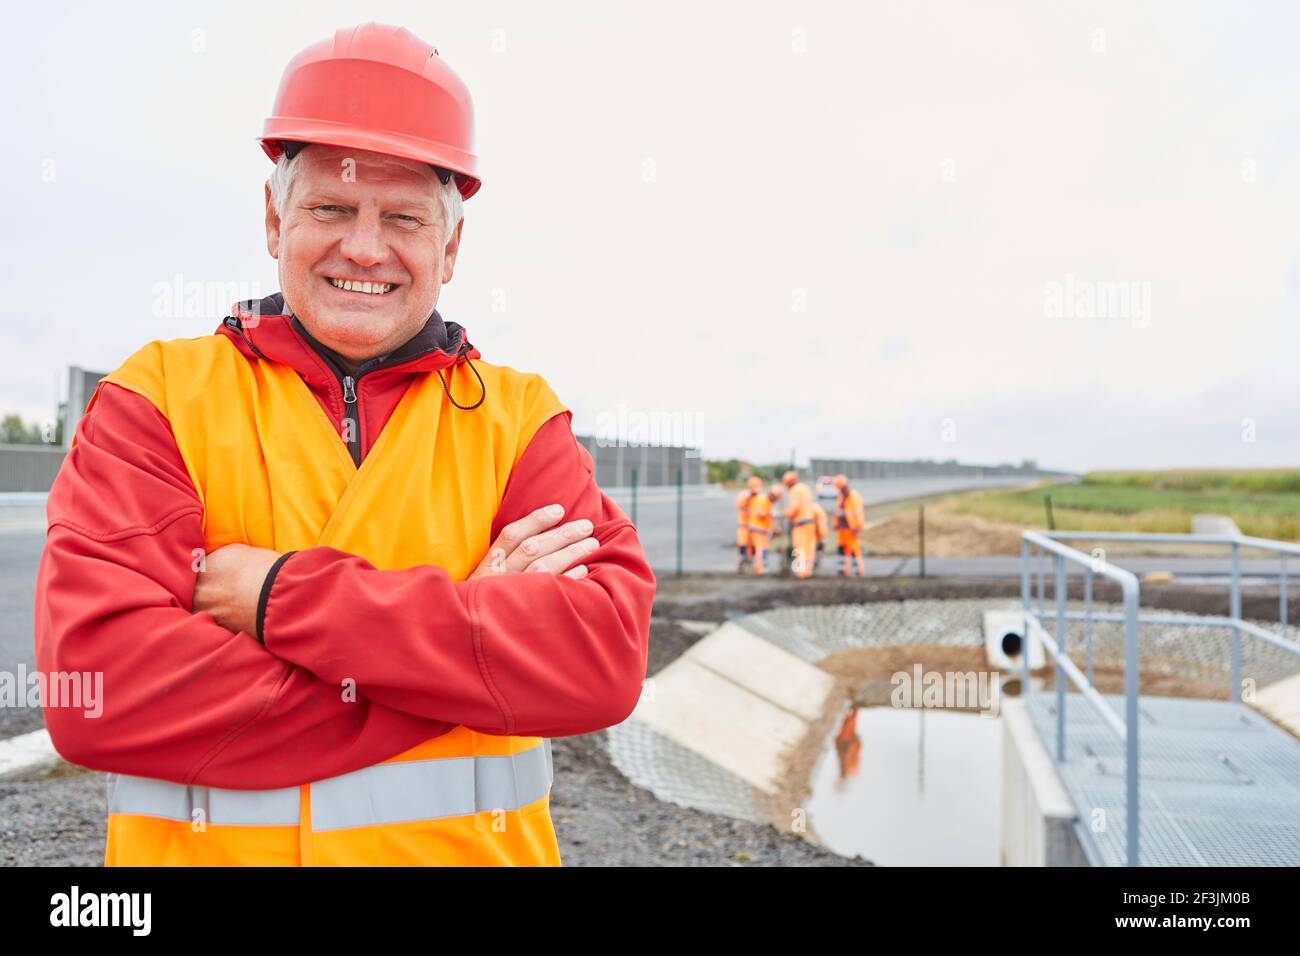 Proud architect or foreman on a road construction site in the new development area Stock Photo